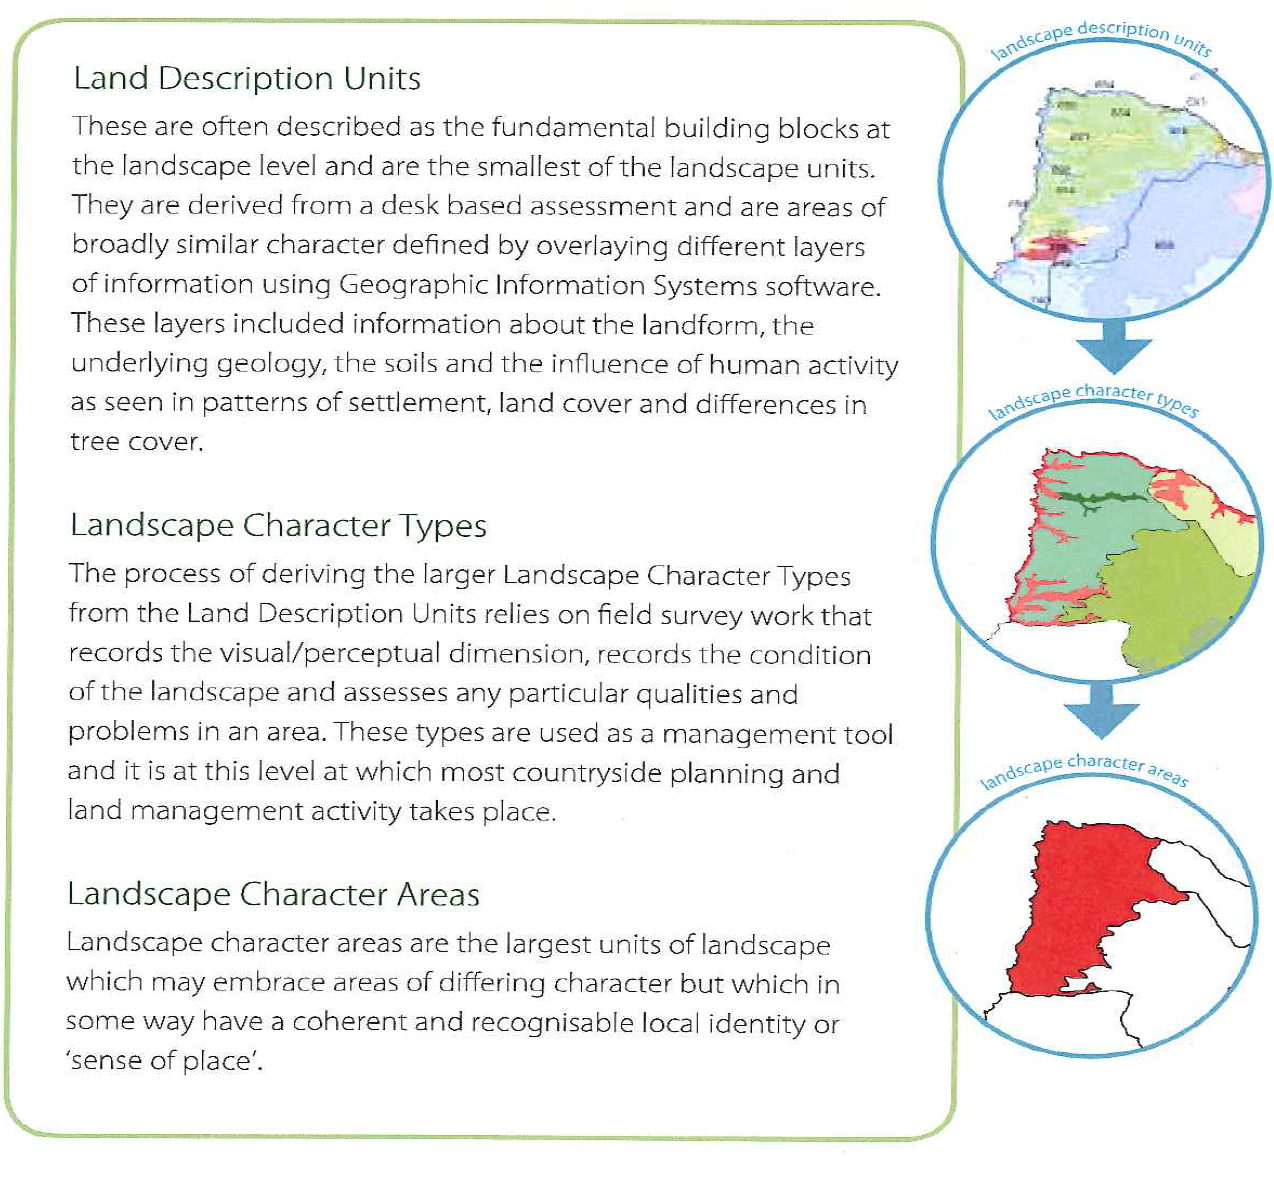 Landscape description units, character types and areas